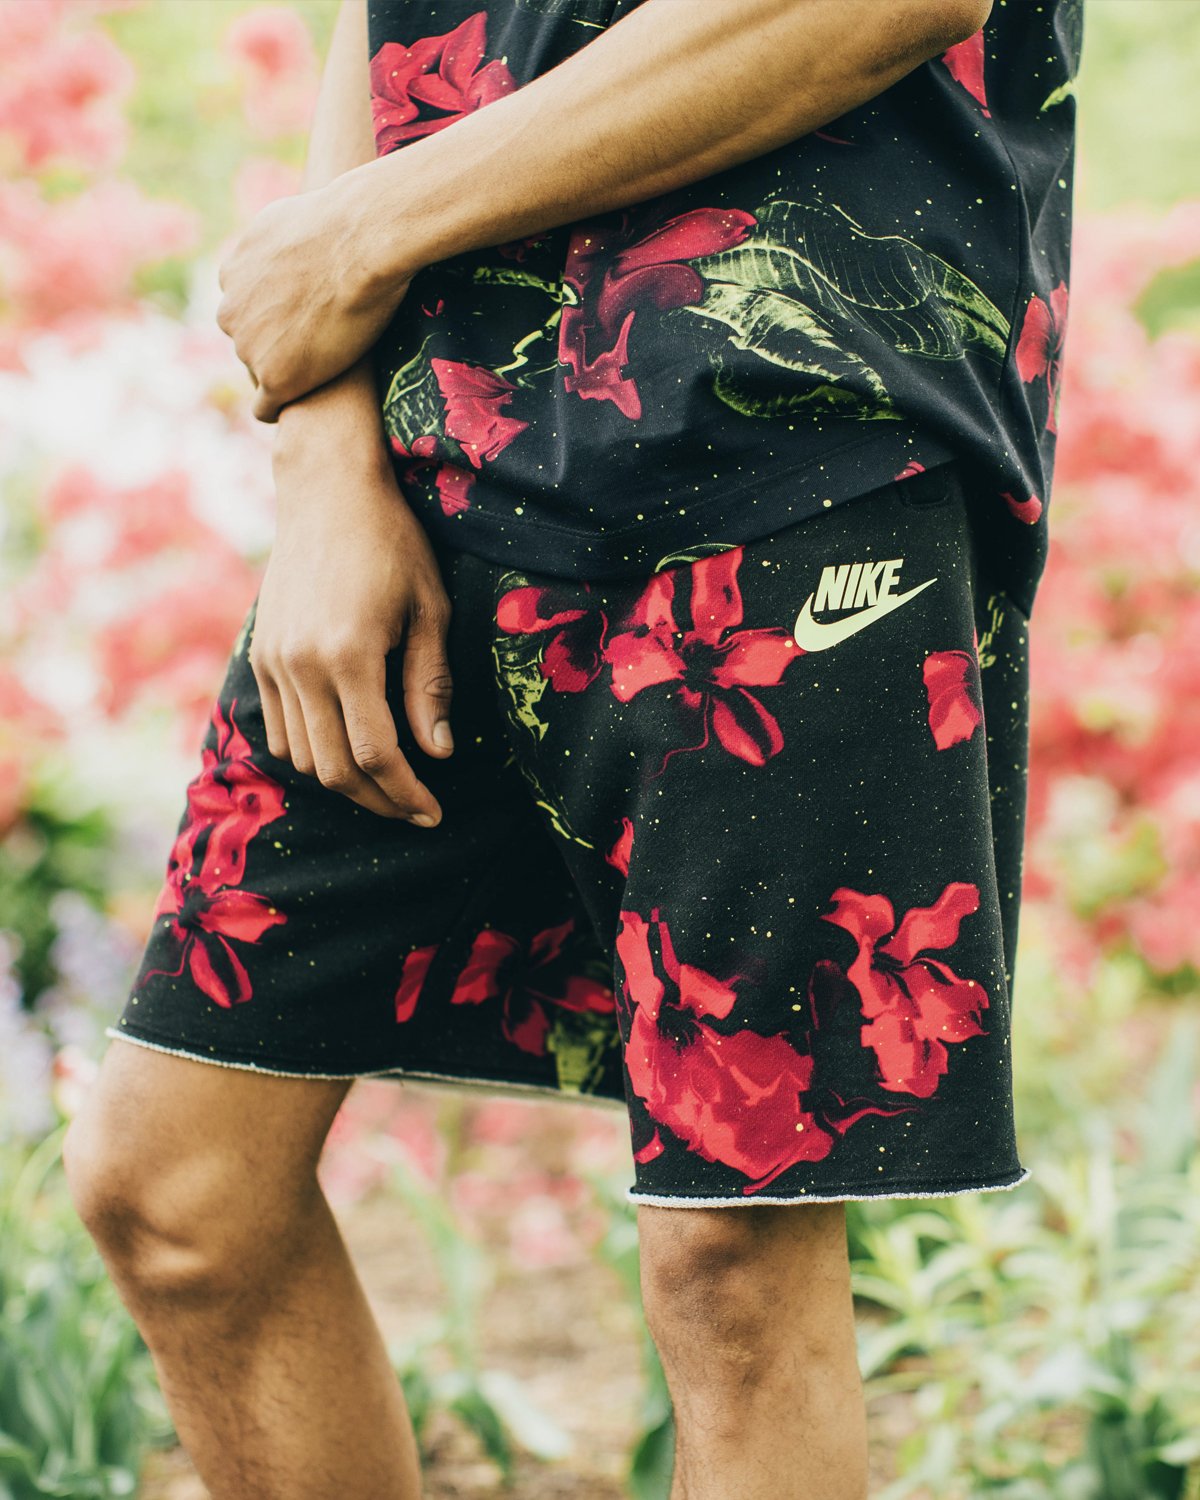 DTLR on Twitter: "The #Nike Sports Wear Floral Fleece shorts and Tee are now in-store and online. Tee: https://t.co/17U1IeO2Xw https://t.co/DpnL9NHucb / Twitter